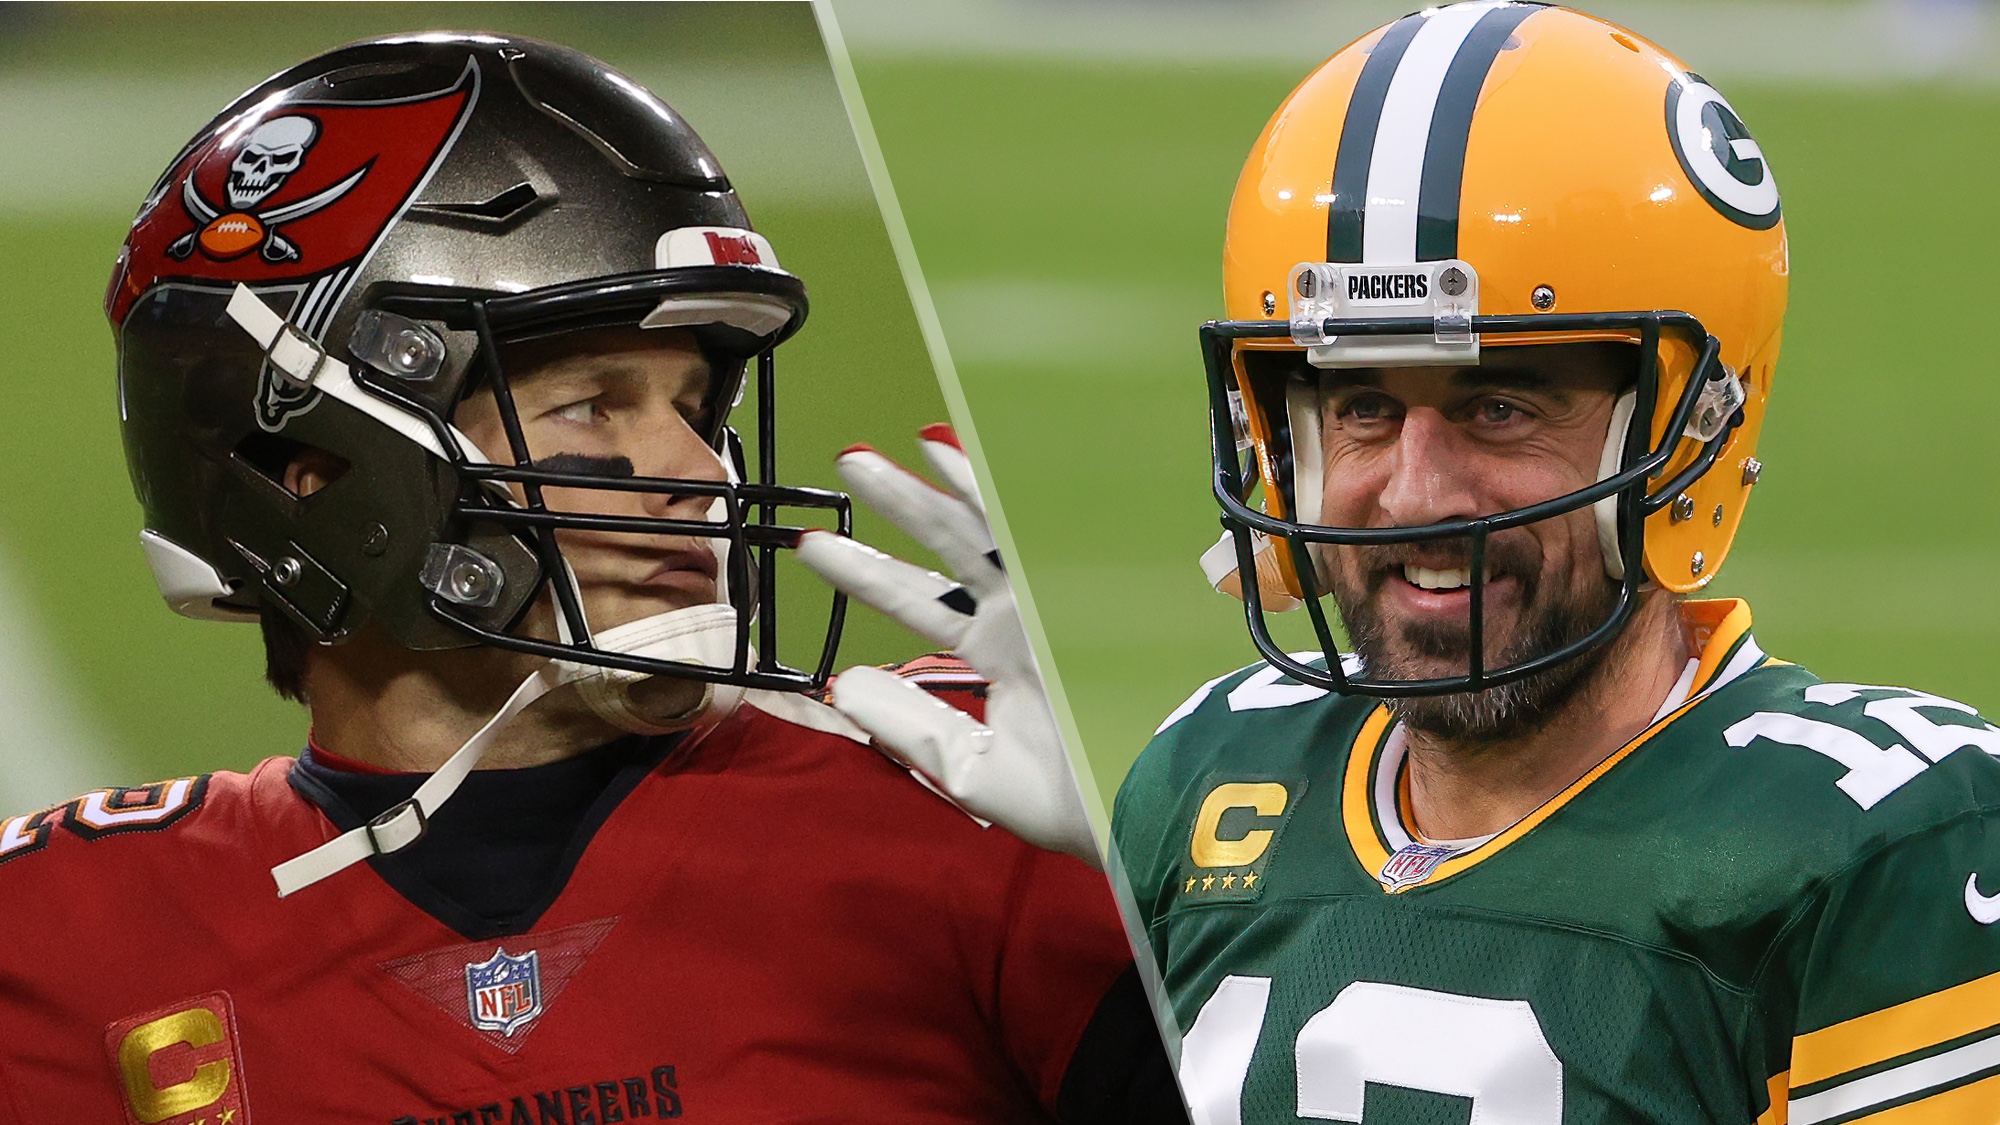 Buccaneers vs Packers live stream: How to watch NFC Championship